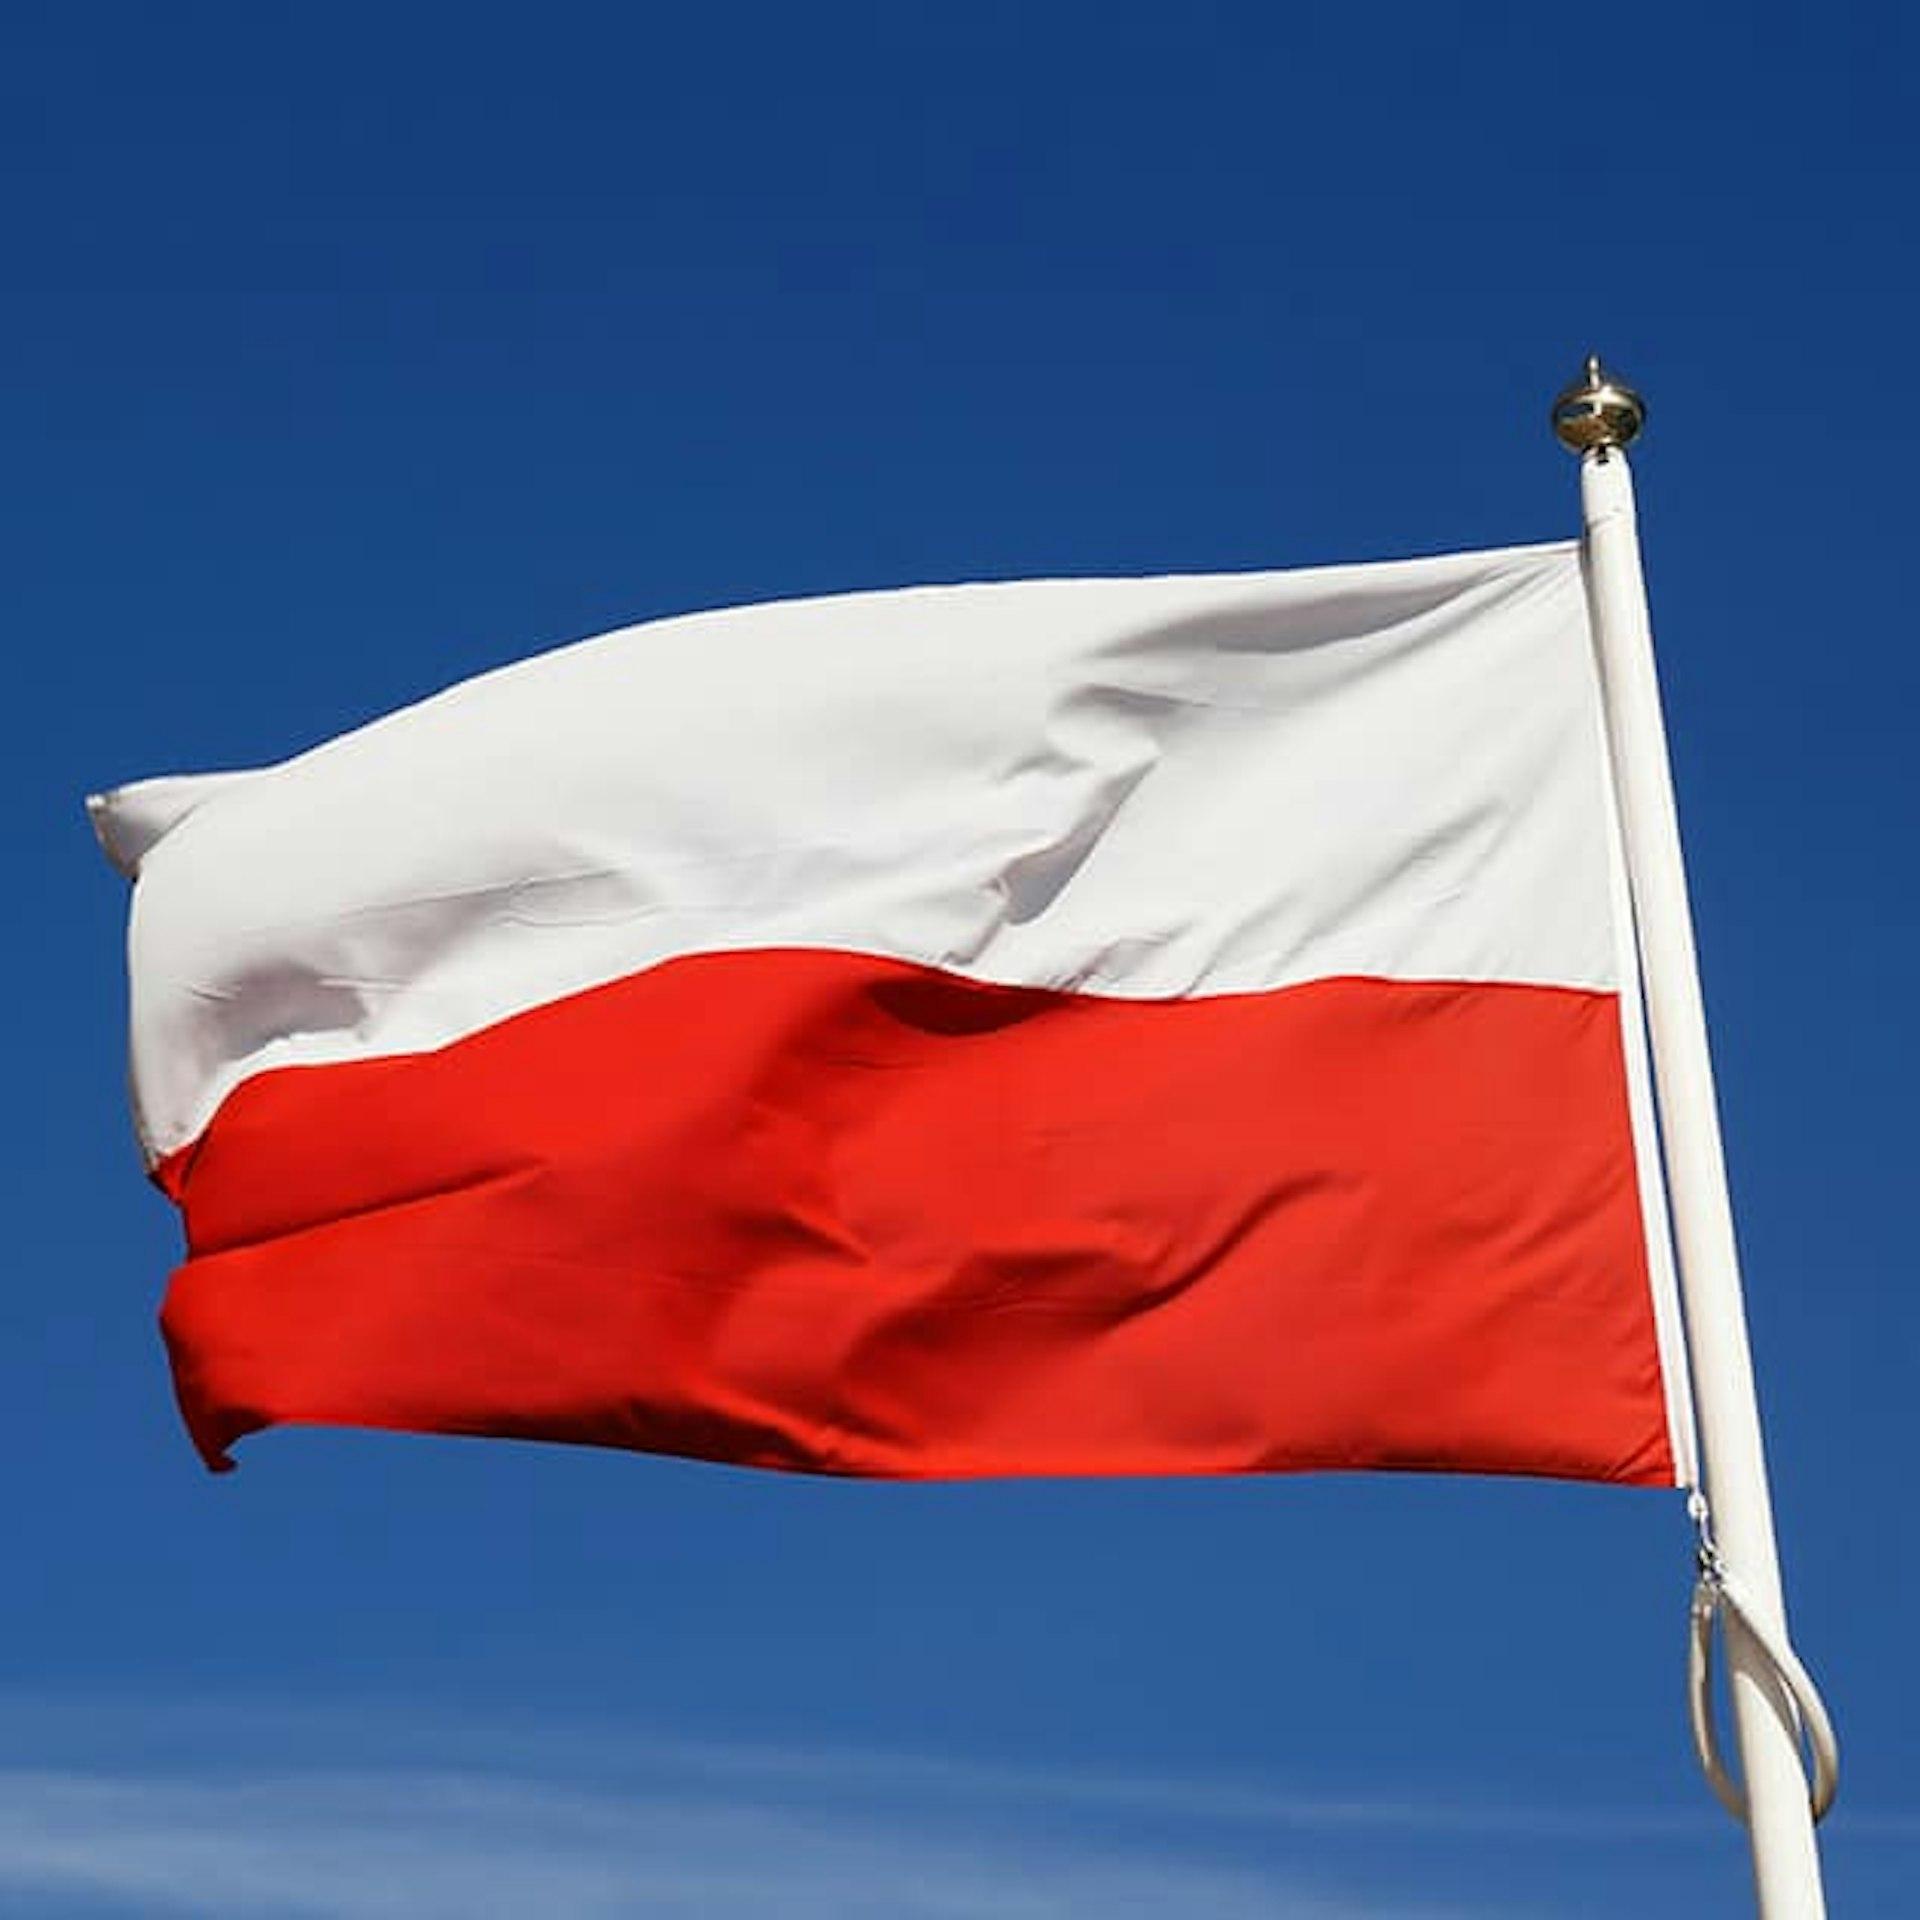 E-invoicing is gaining ground in Poland. Read up on the subject and how to get started!